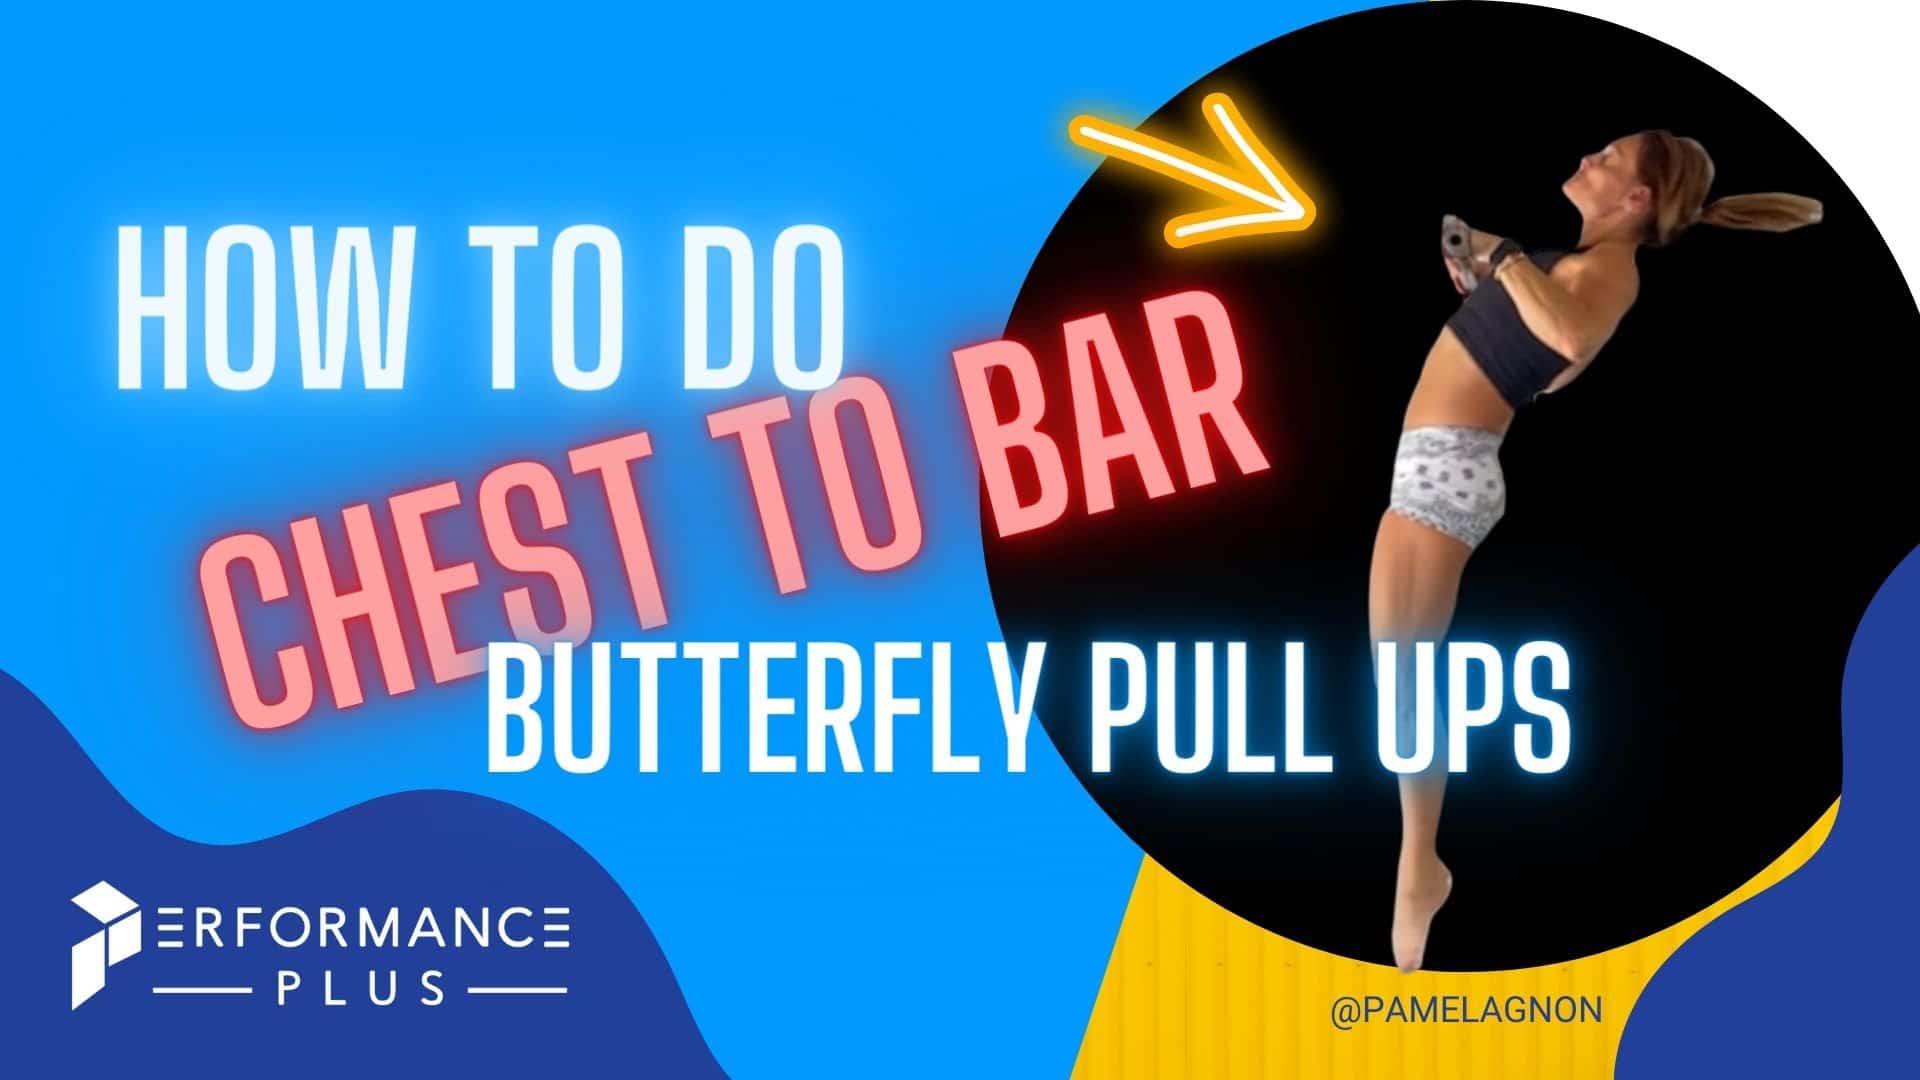 Featured image for “Chest to Bar Butterfly Pull-ups”